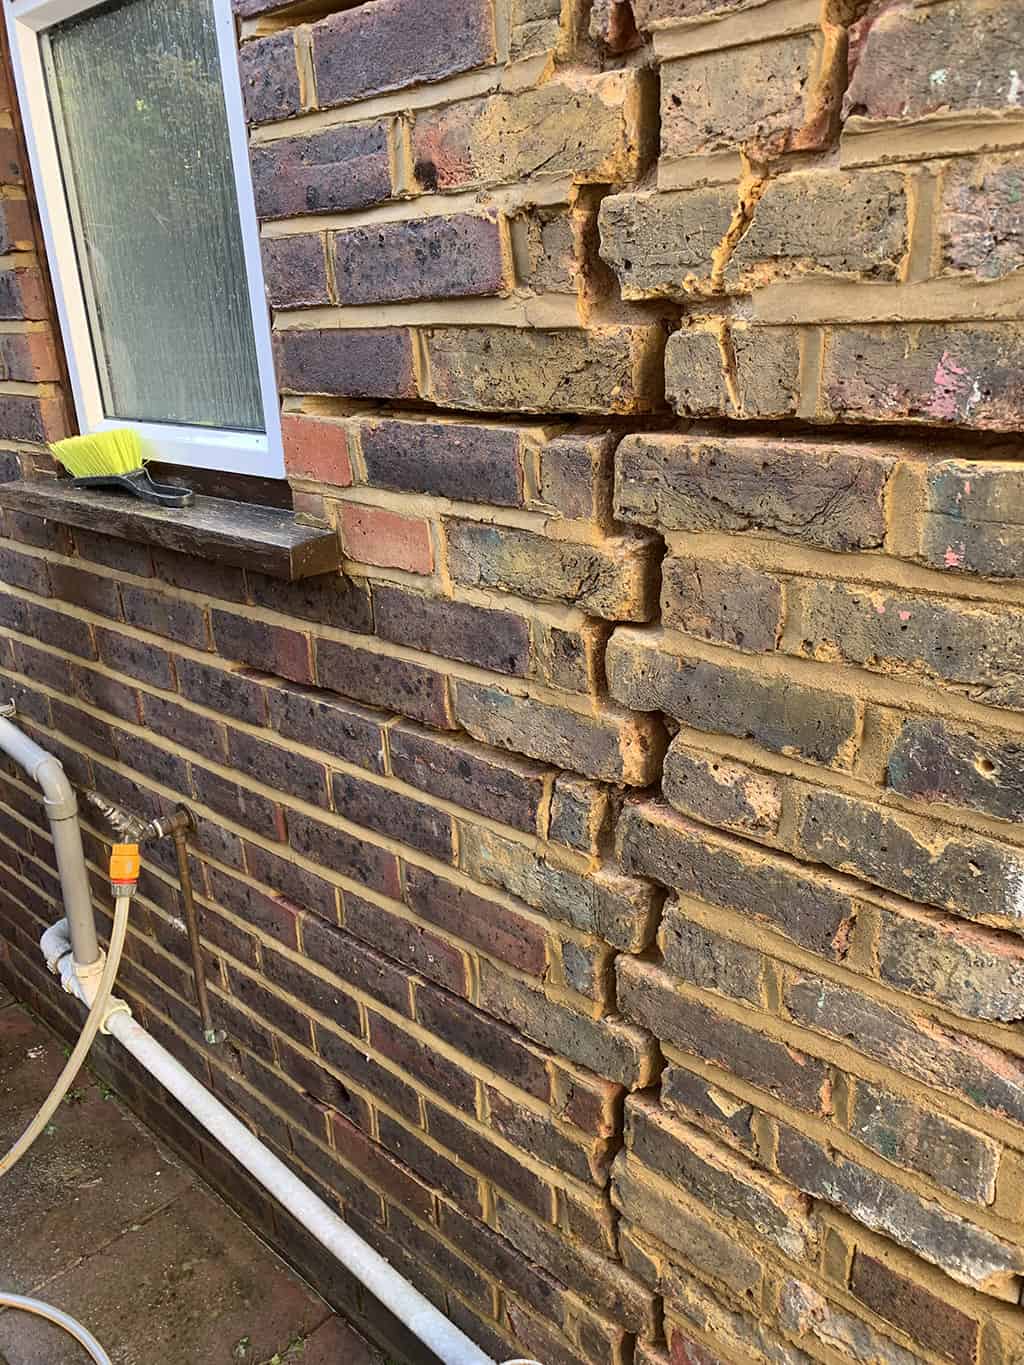 Helifix Crack Repair Stitching Products to Stabilise Cracked Masonry